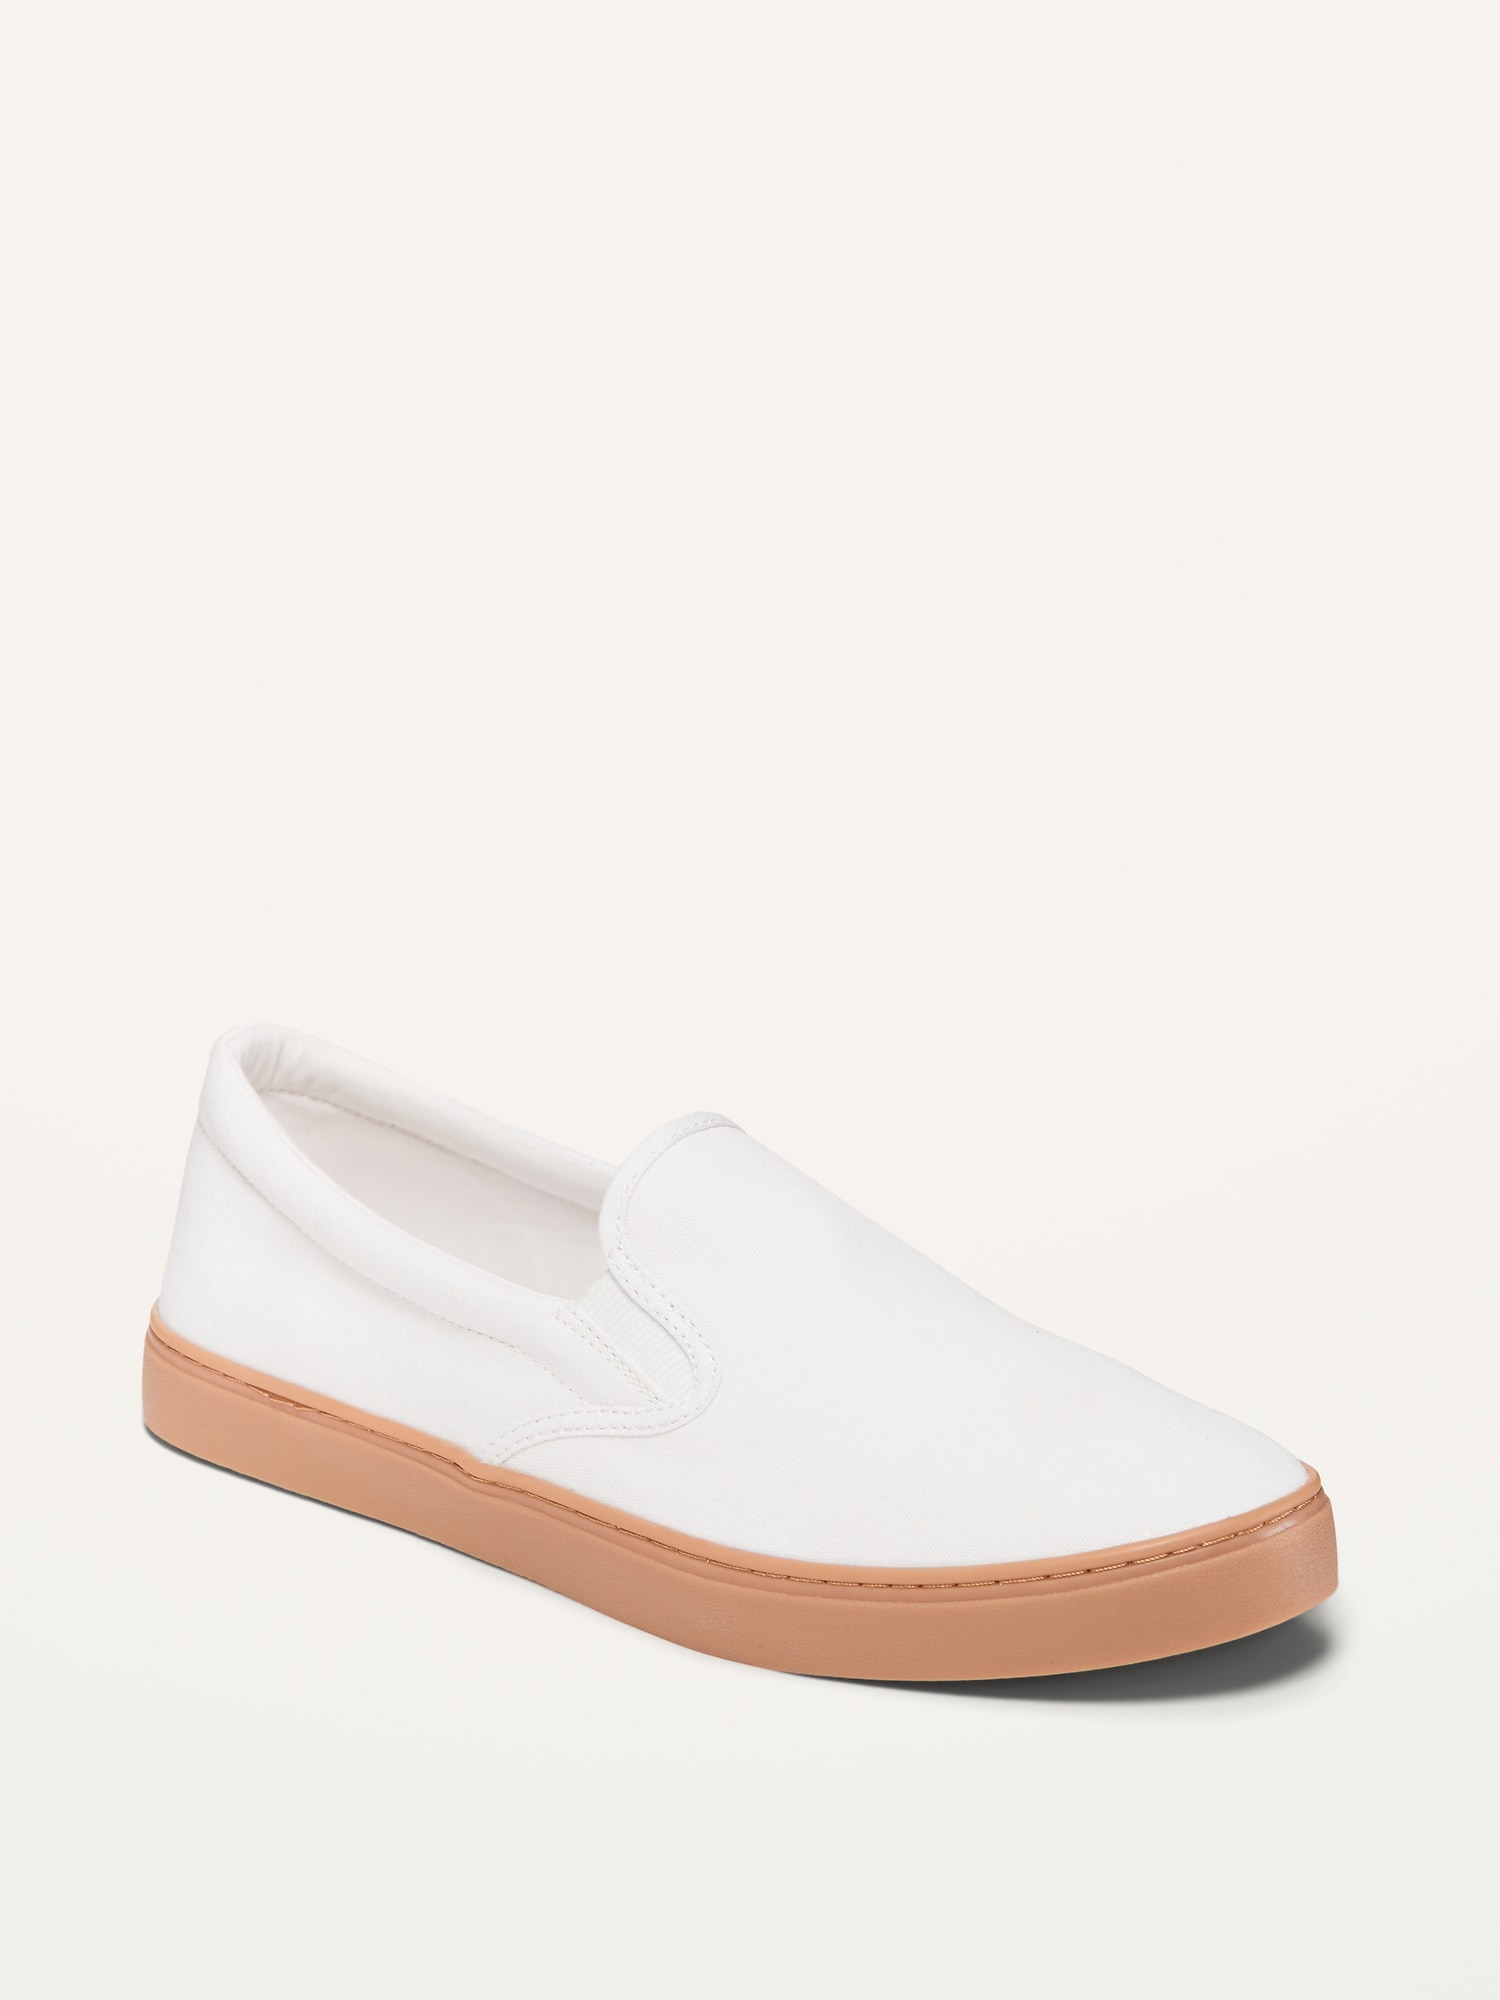 canvas slip on shoes canada